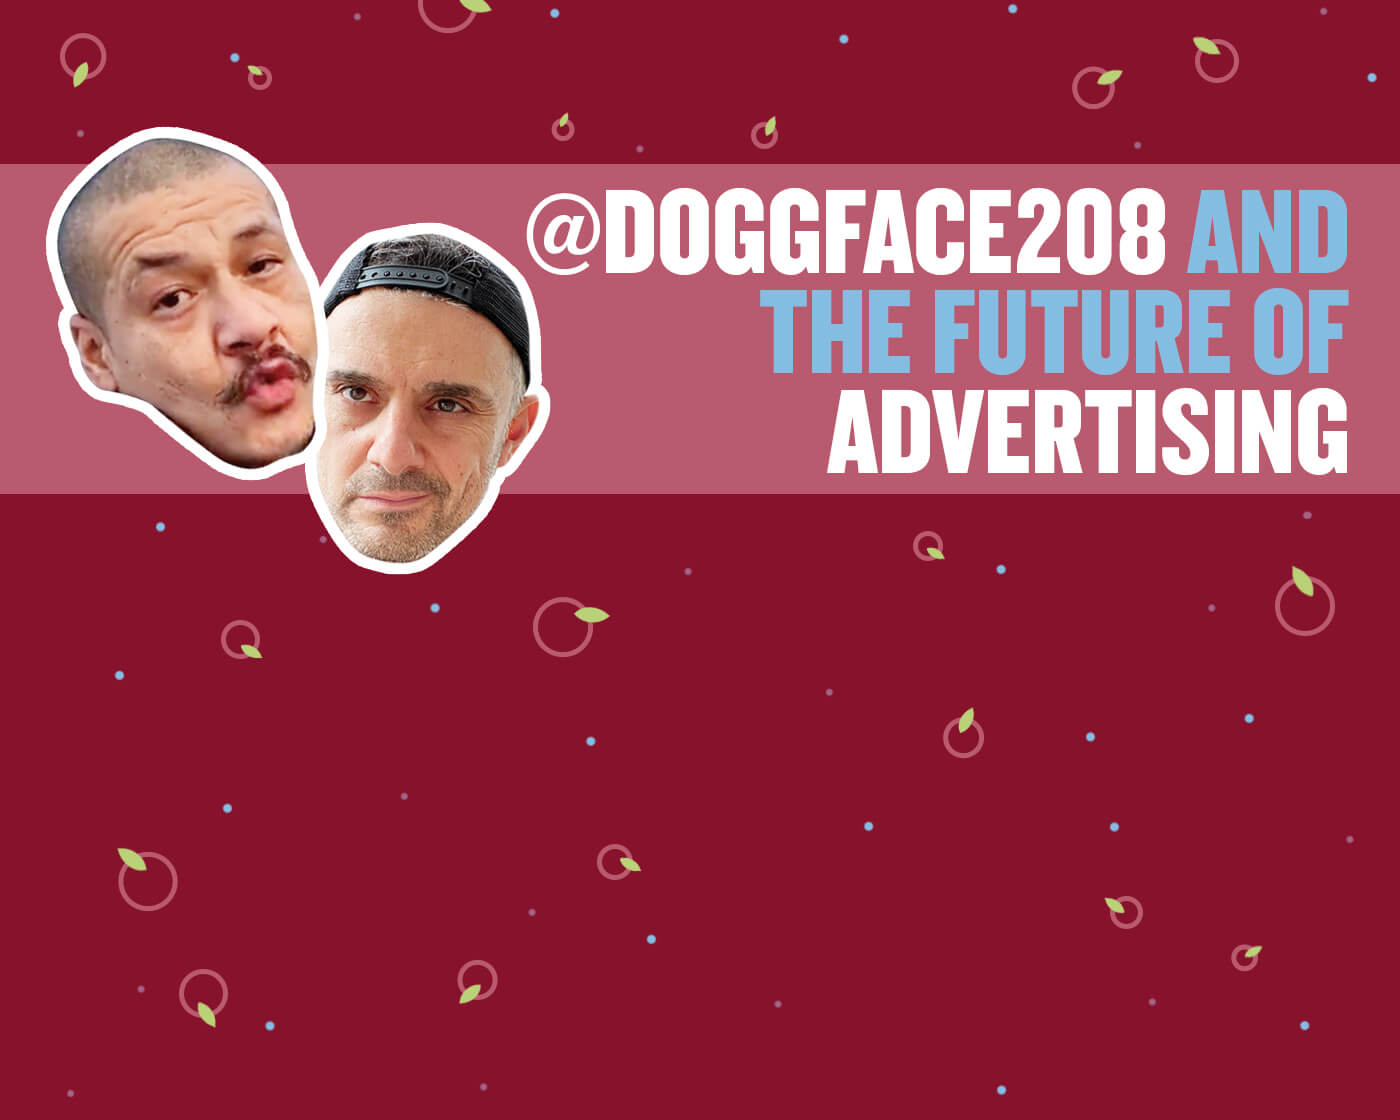 DoggFace208 and the Future of Advertising